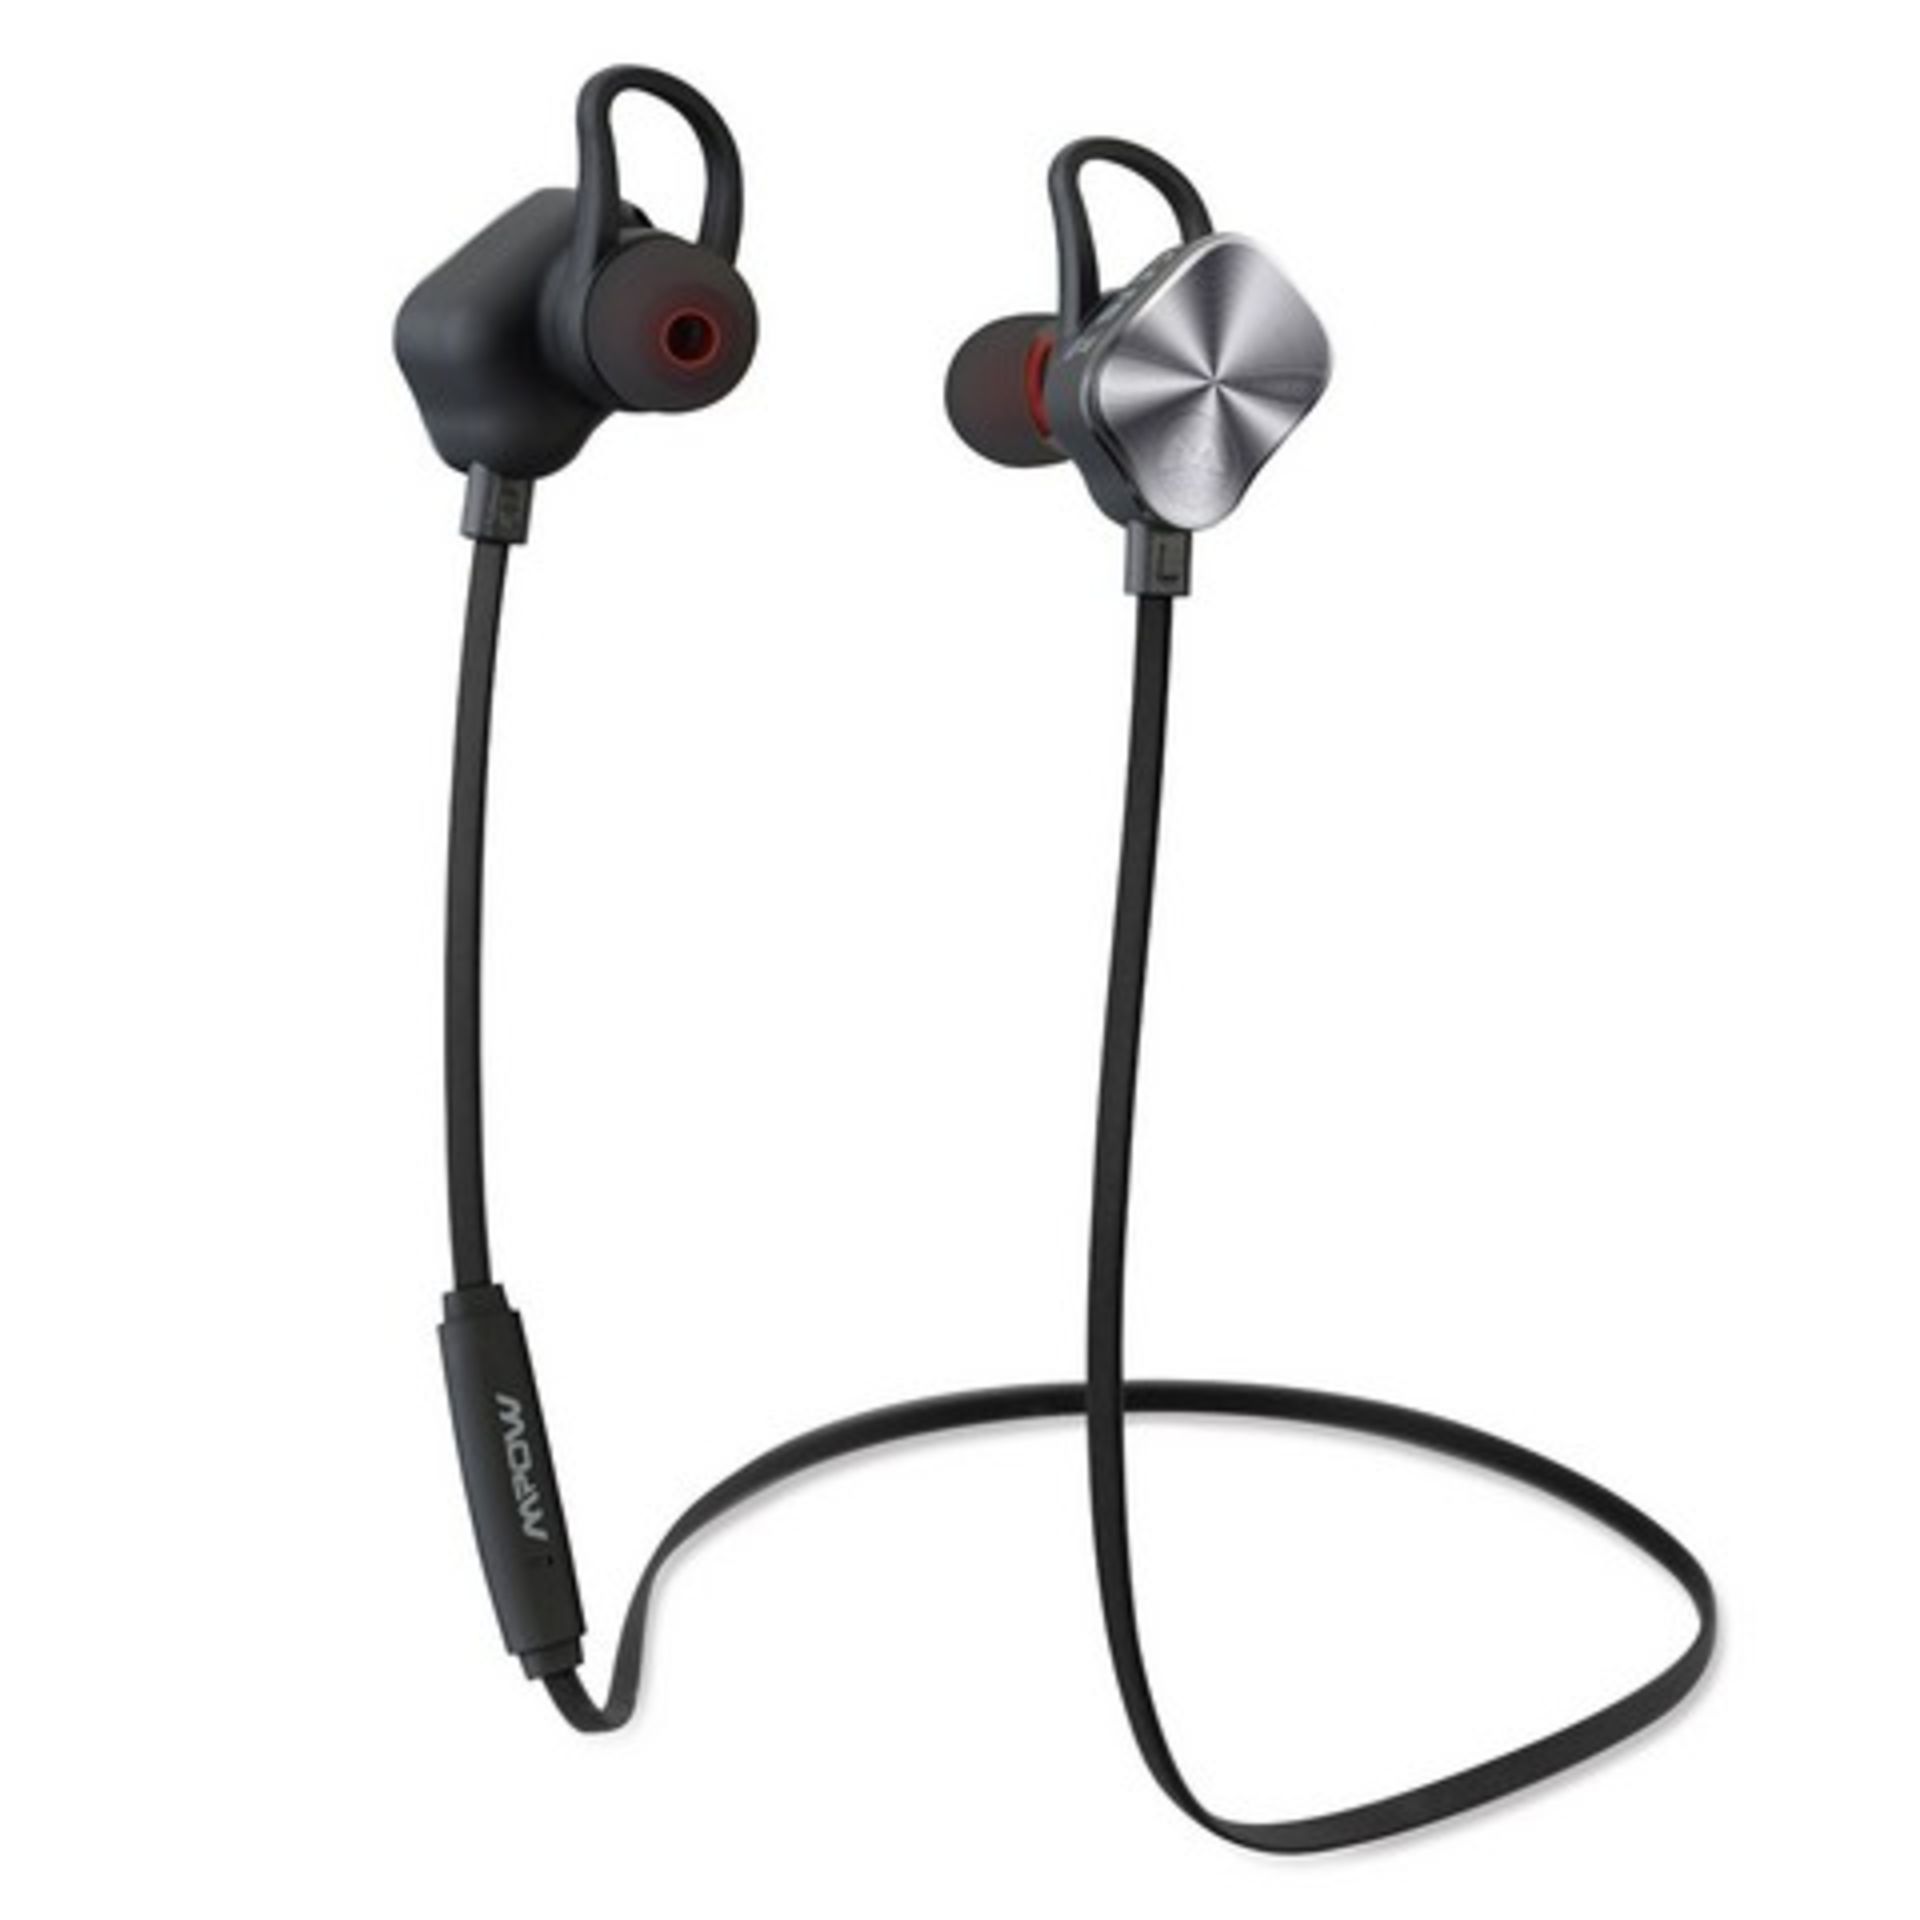 V Brand New Pair of Bluetooth Earphones/Headset (All Boxed) - Colours and Styles/Makes May Vary - - Image 6 of 7